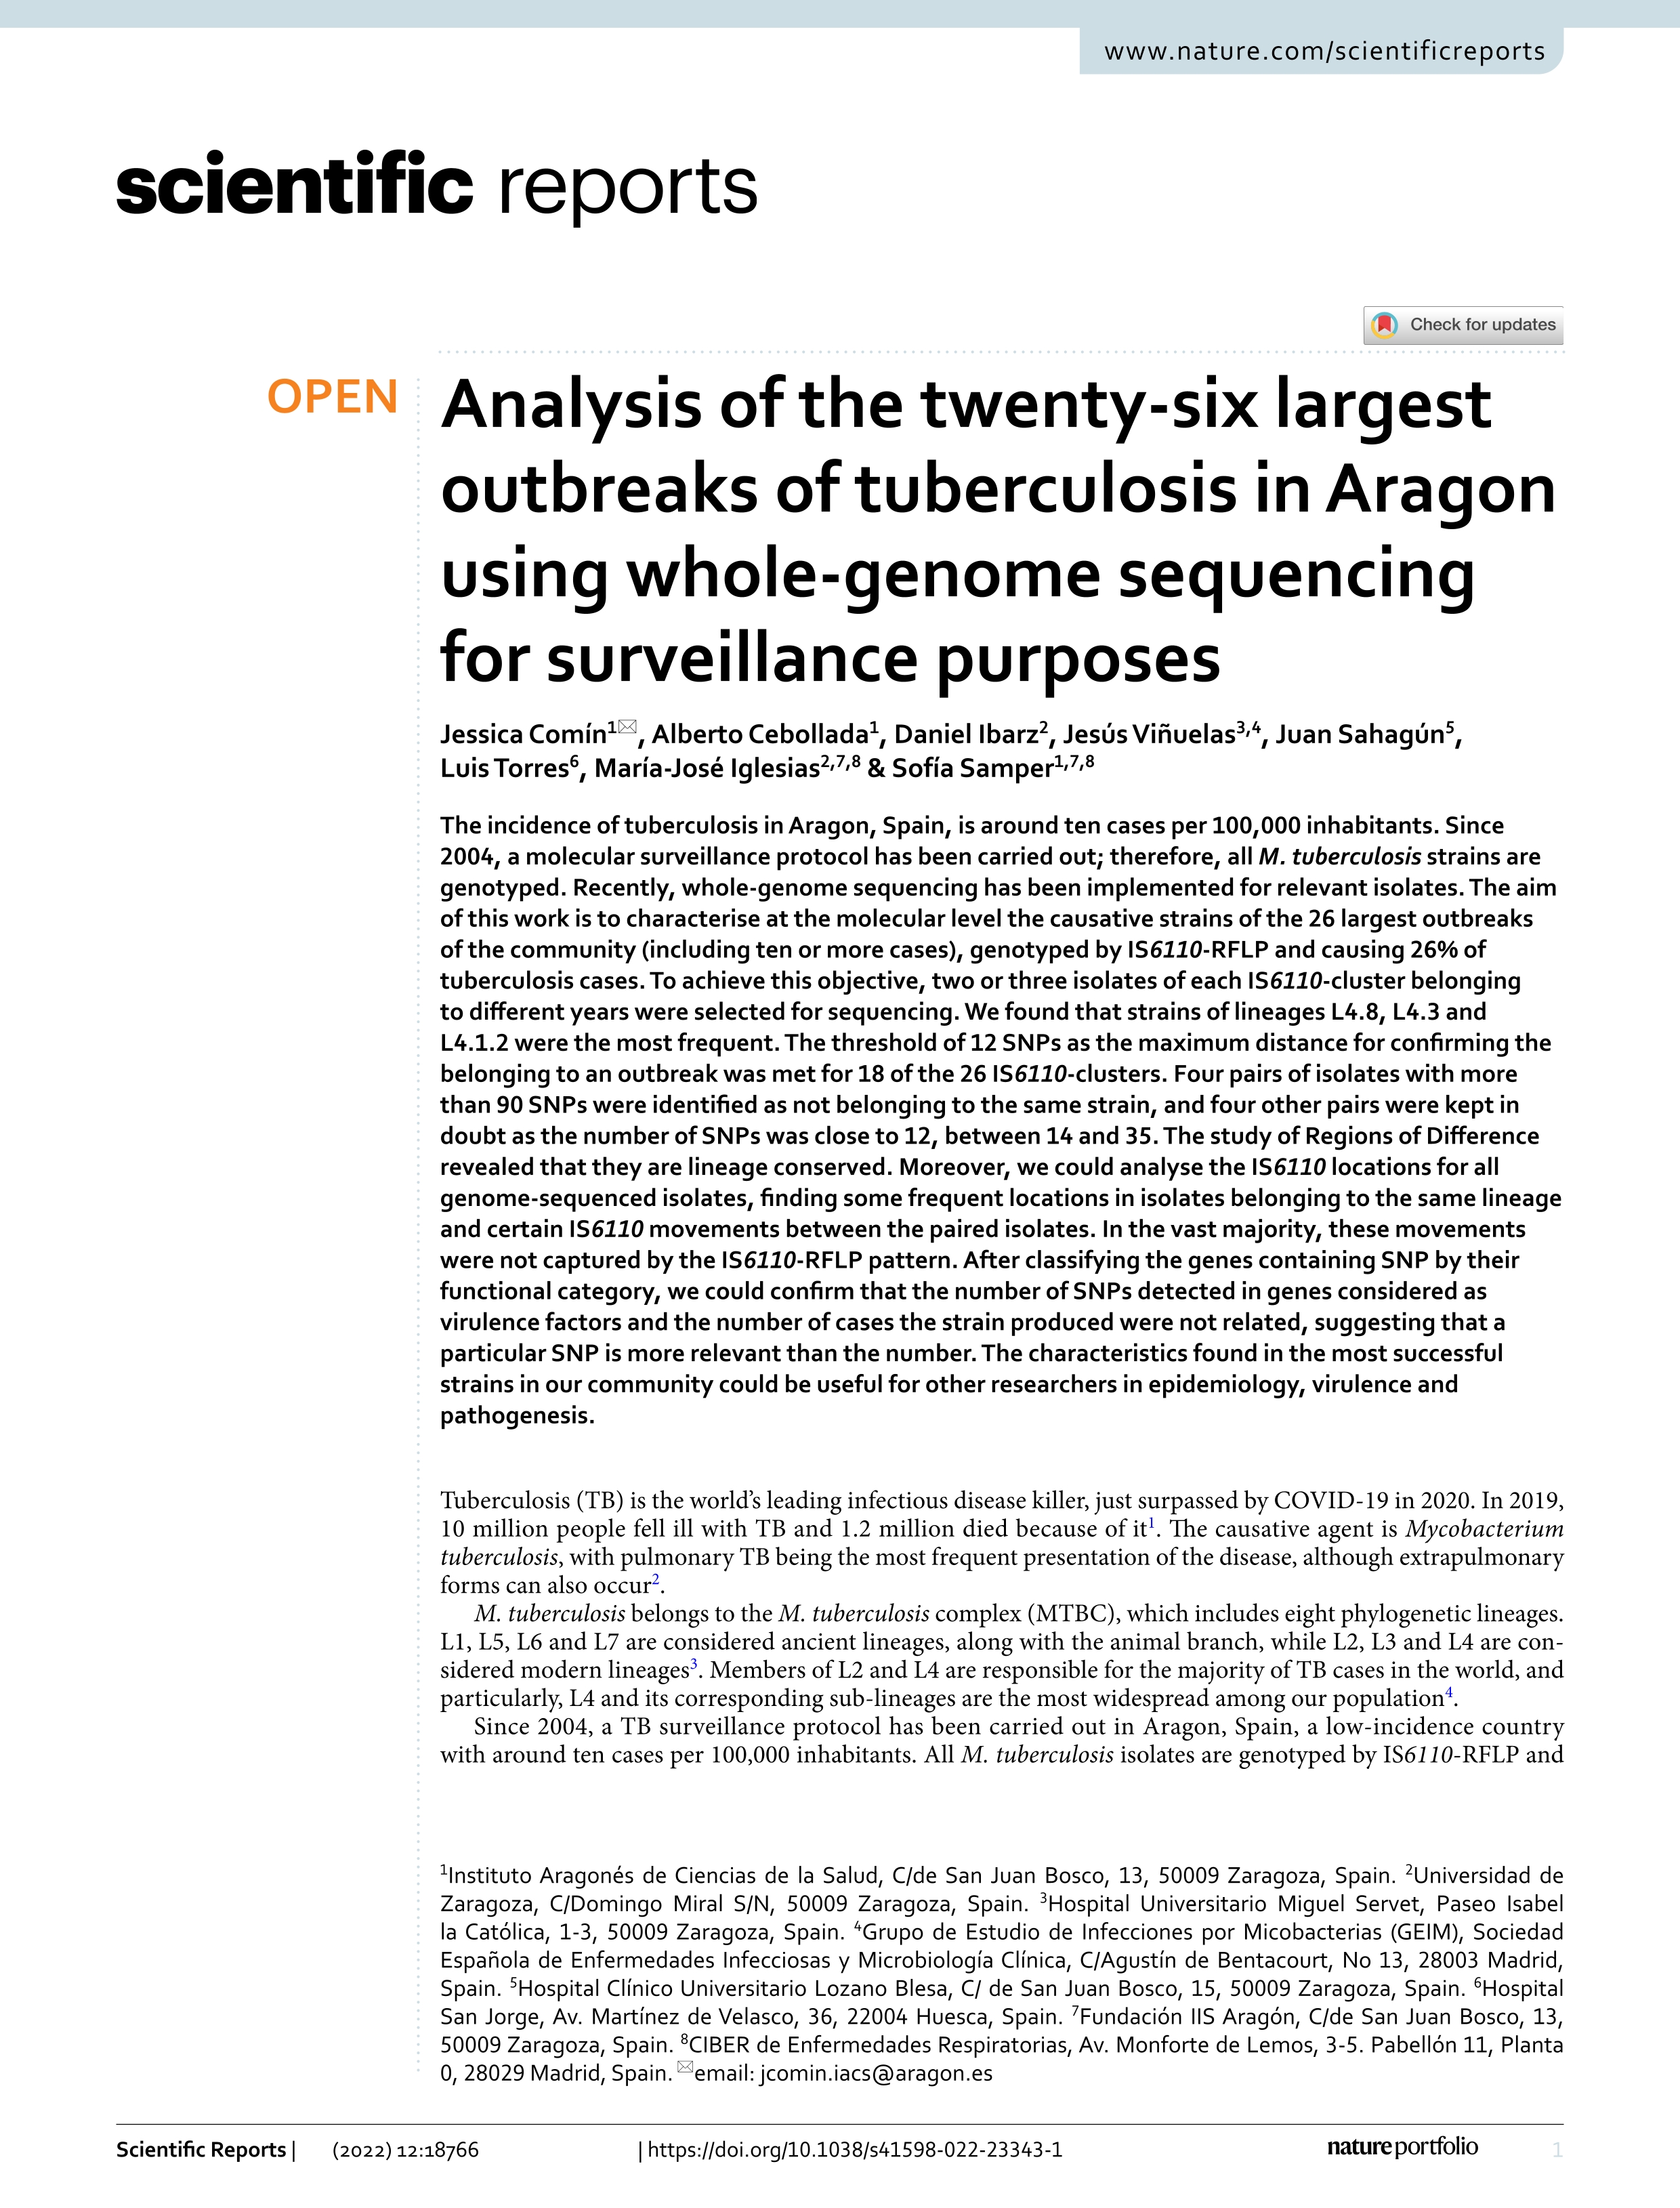 Analysis of the twenty-six largest outbreaks of tuberculosis in Aragon using whole-genome sequencing for surveillance purposes